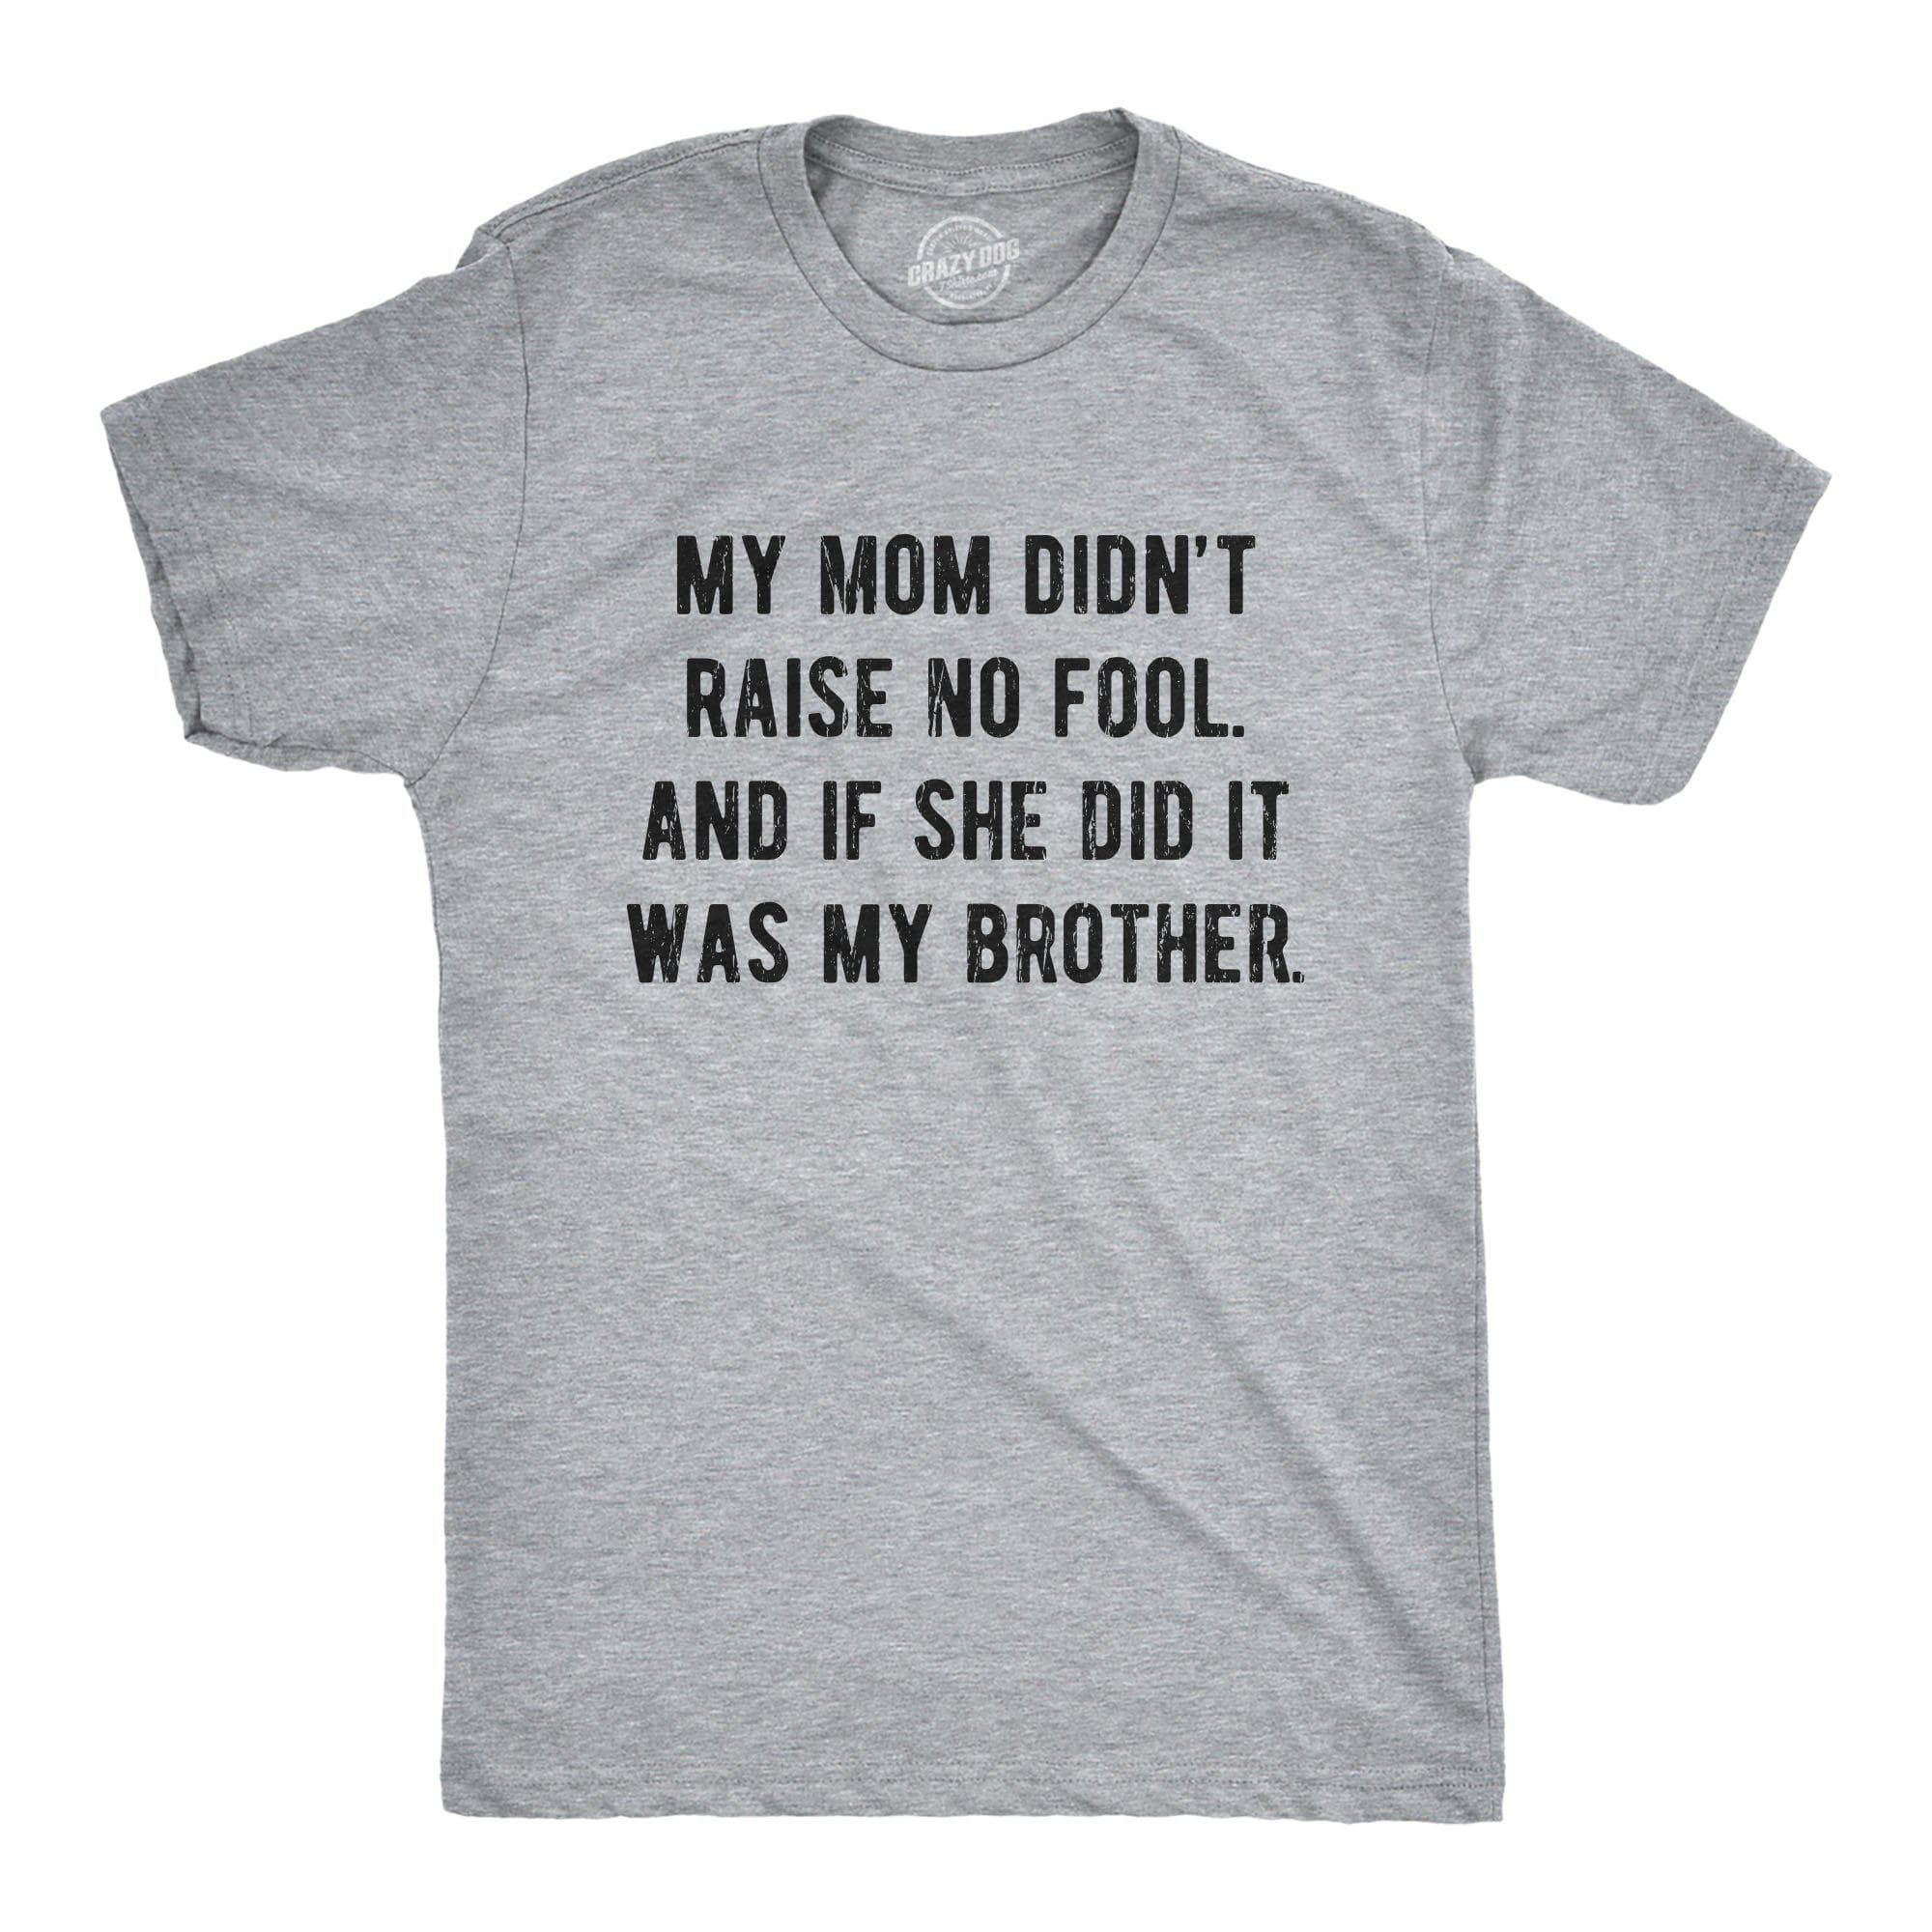 My Mom Didn't Raise No Fool And If She Did It Was My Brother Men's Tshirt - Crazy Dog T-Shirts